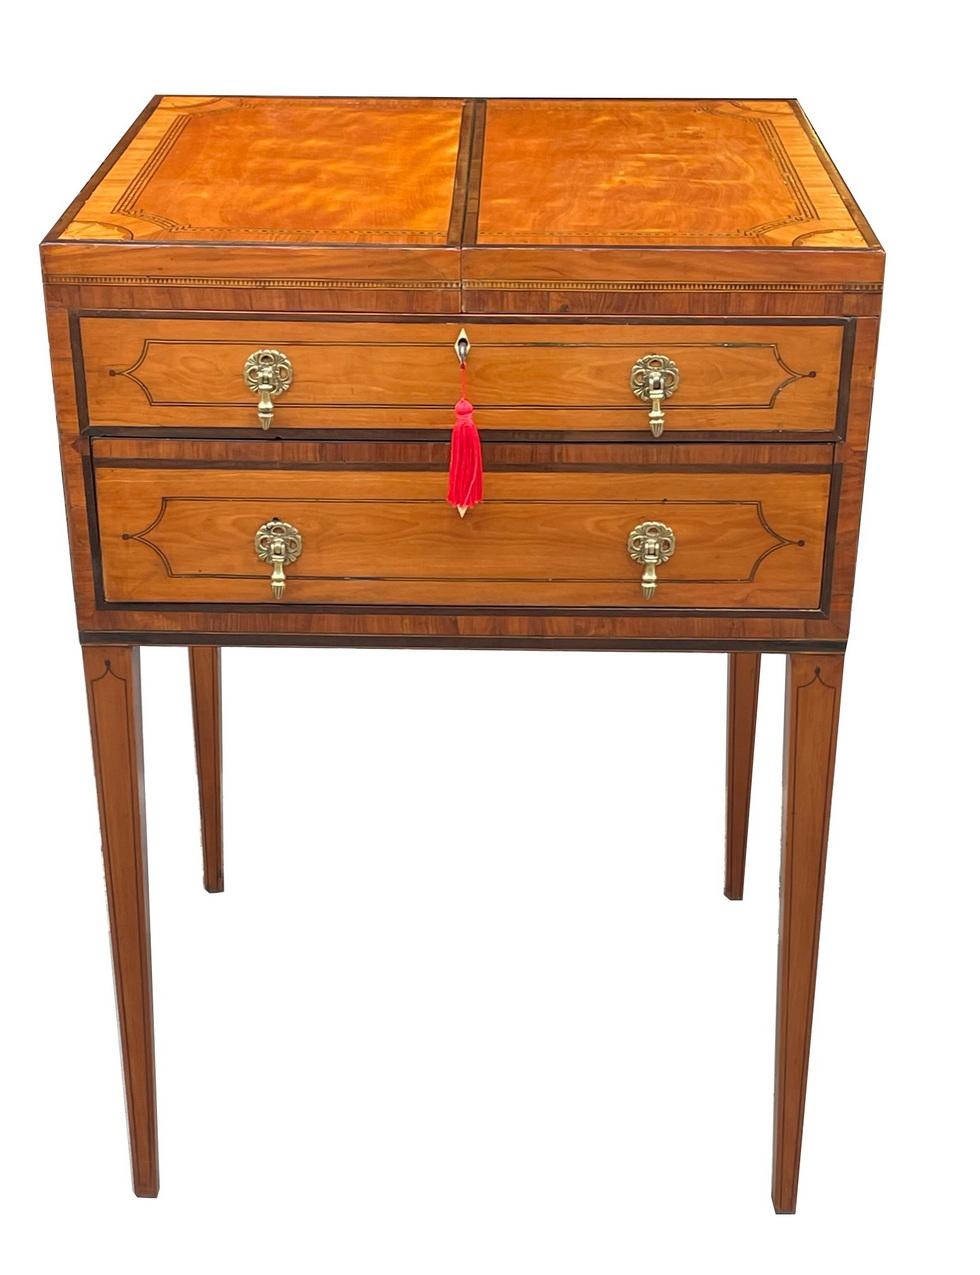 English Antique Gentlemans Satinwood Rosewood Crossbanded Speciman Cabinet Early 19th Ct For Sale